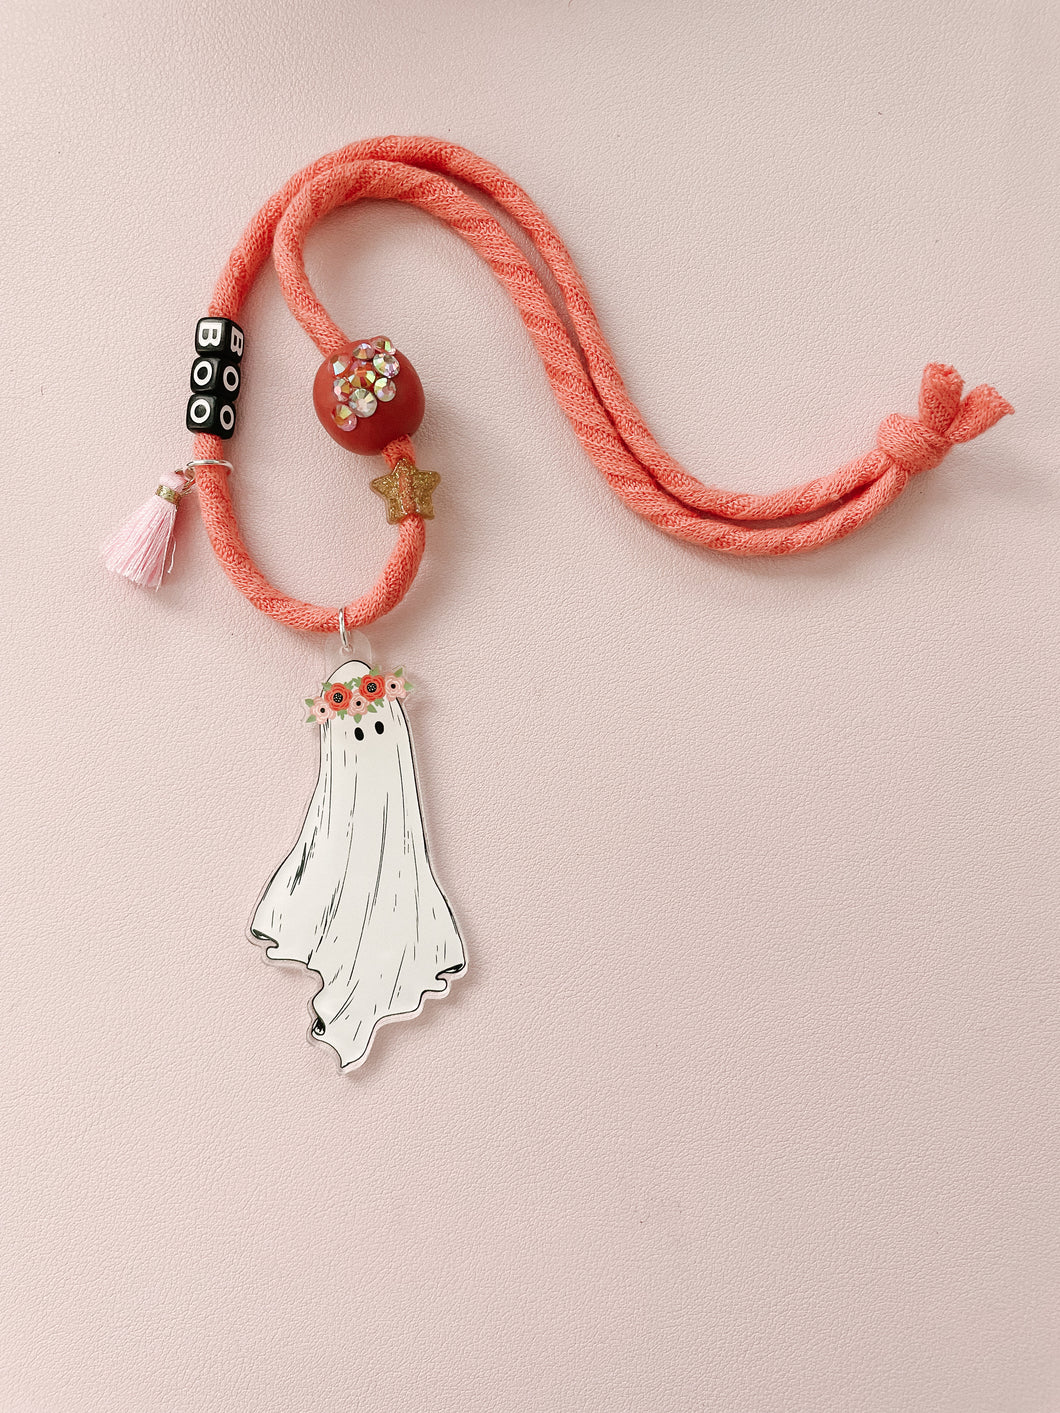 The Ghostie Necklace